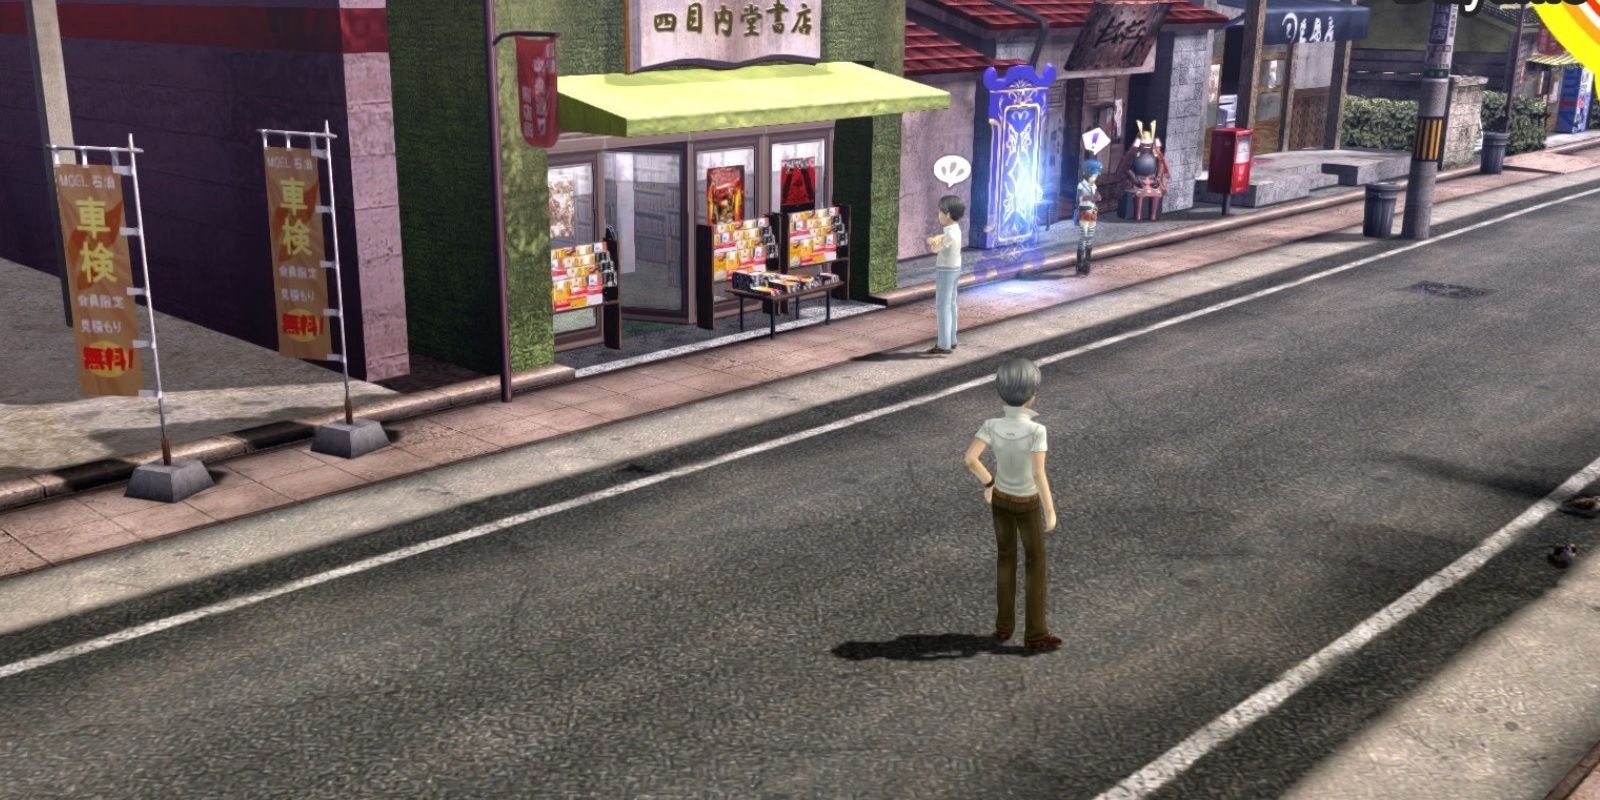 the player character from persona 4 on a street corner